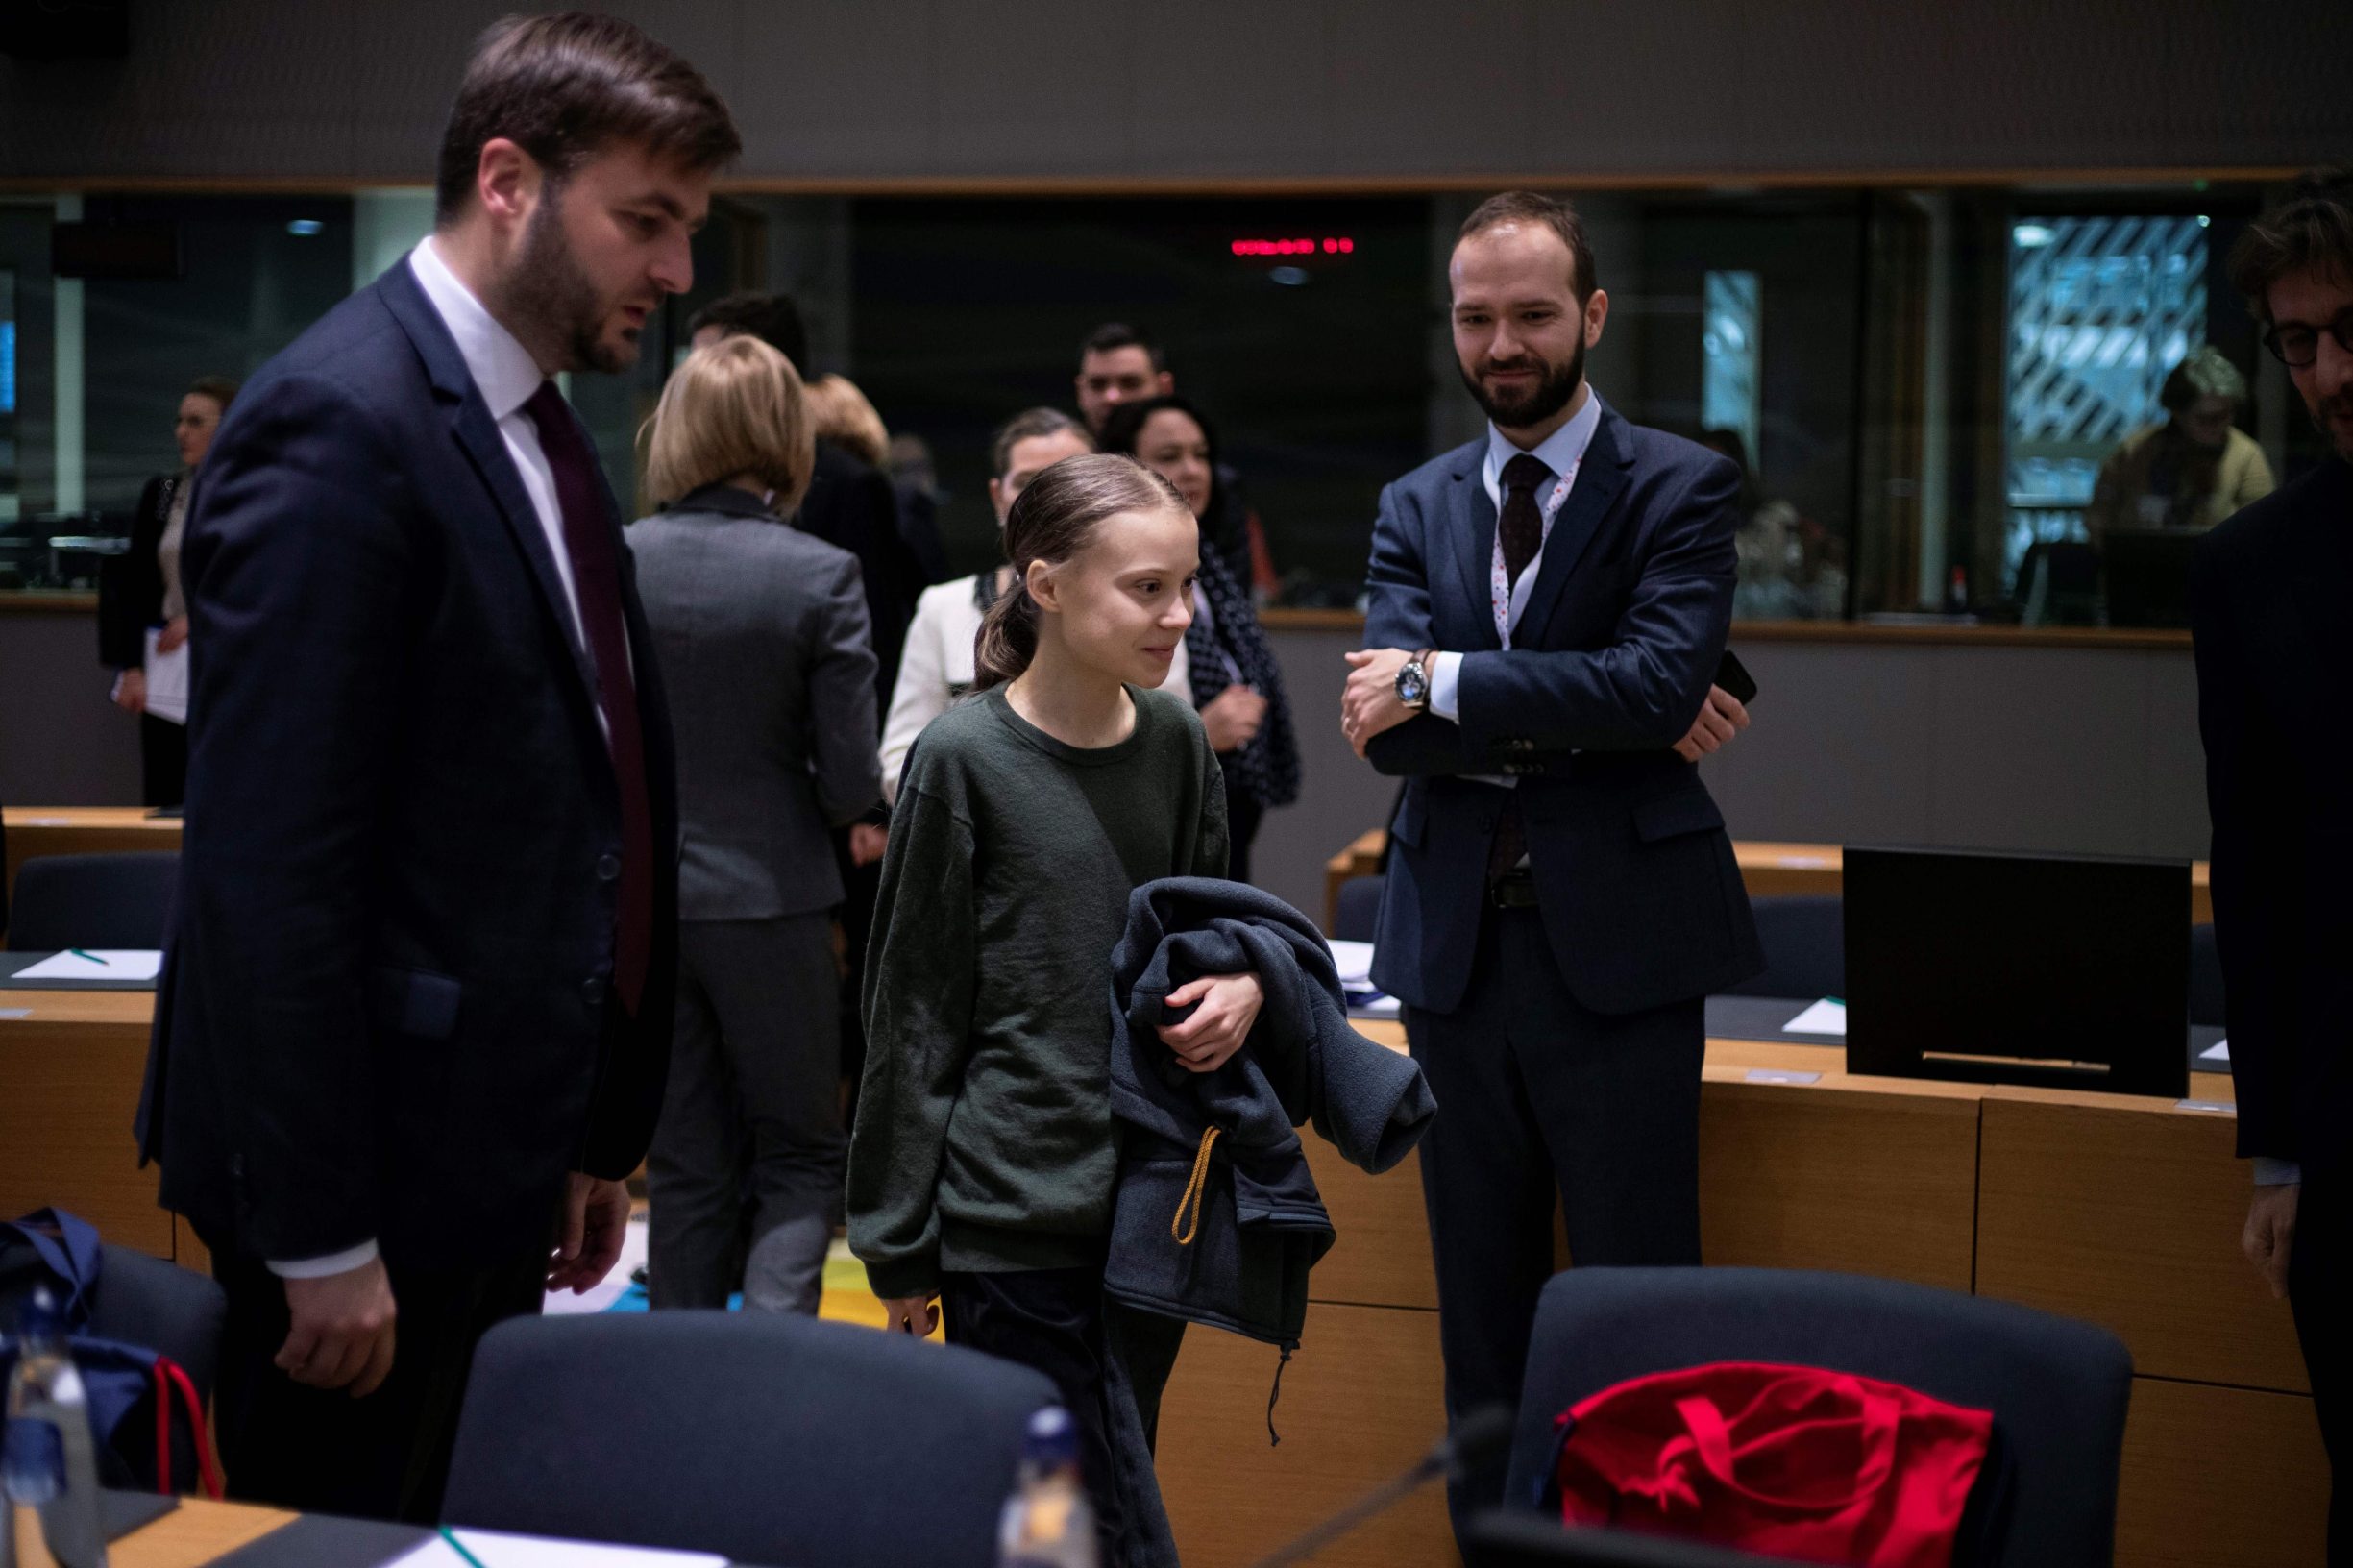 Swedish environmentalist Greta Thunberg arrives for a meeting at the Europa building in Brussels on March 5, 2020. (Photo by Kenzo TRIBOUILLARD / AFP)